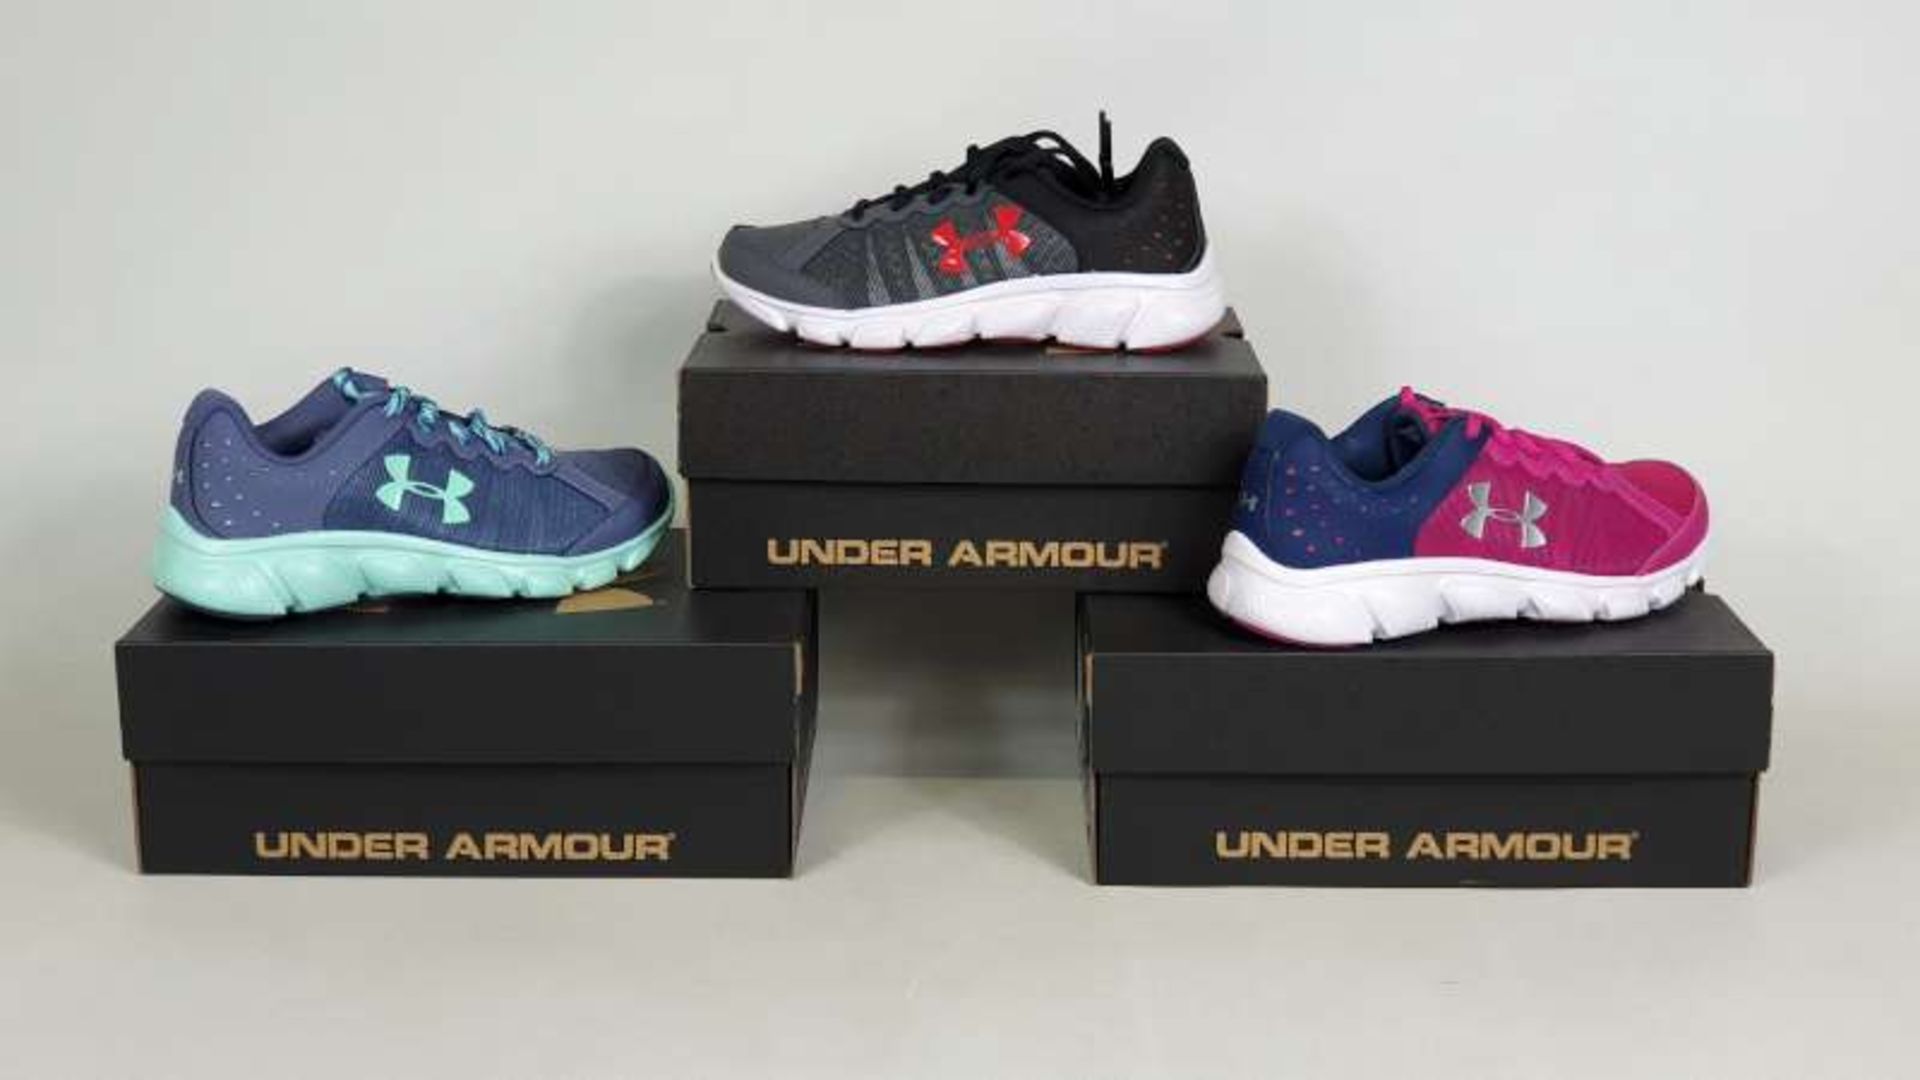 10 X BOXED UNDER ARMOUR CHILDRENS ASSERT 6 TRAINERS IN VARIOUS STYLES AND SIZES